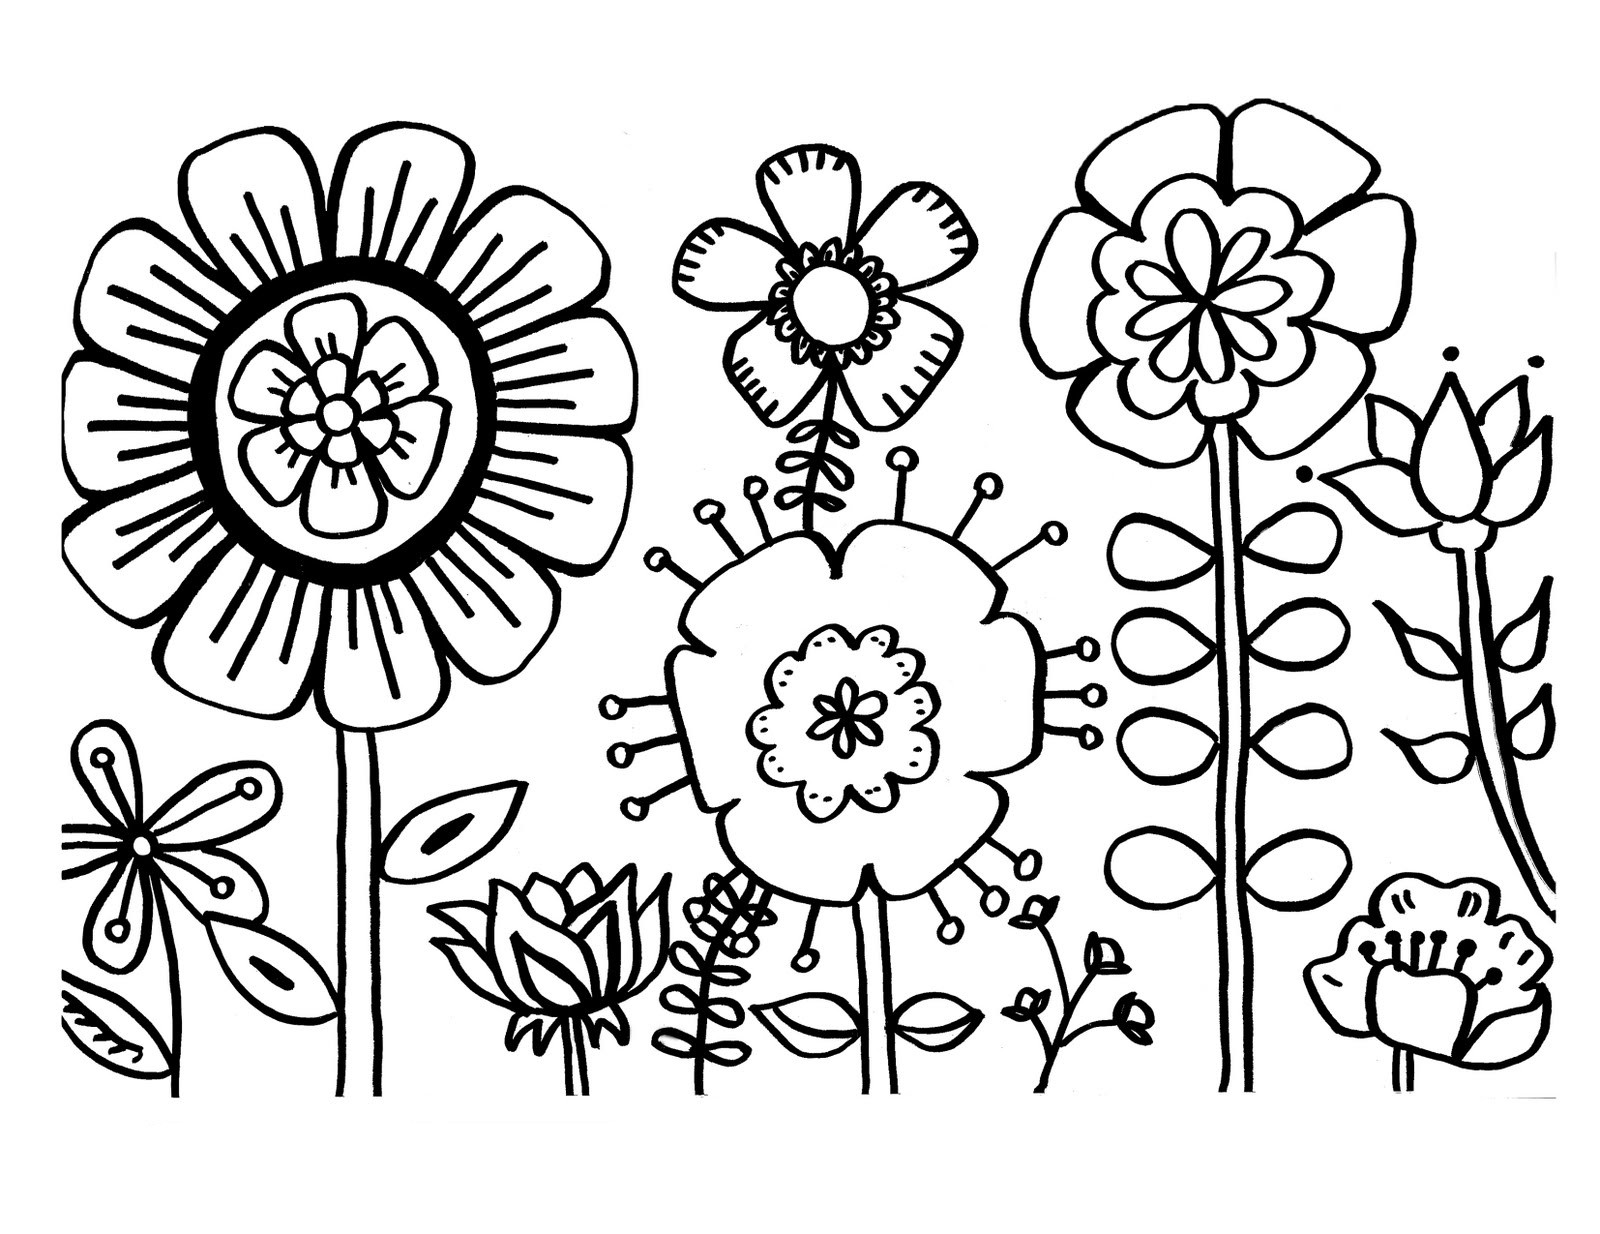 Flower Printable Coloring Pages
 Free Printable Flower Coloring Pages For Kids Best